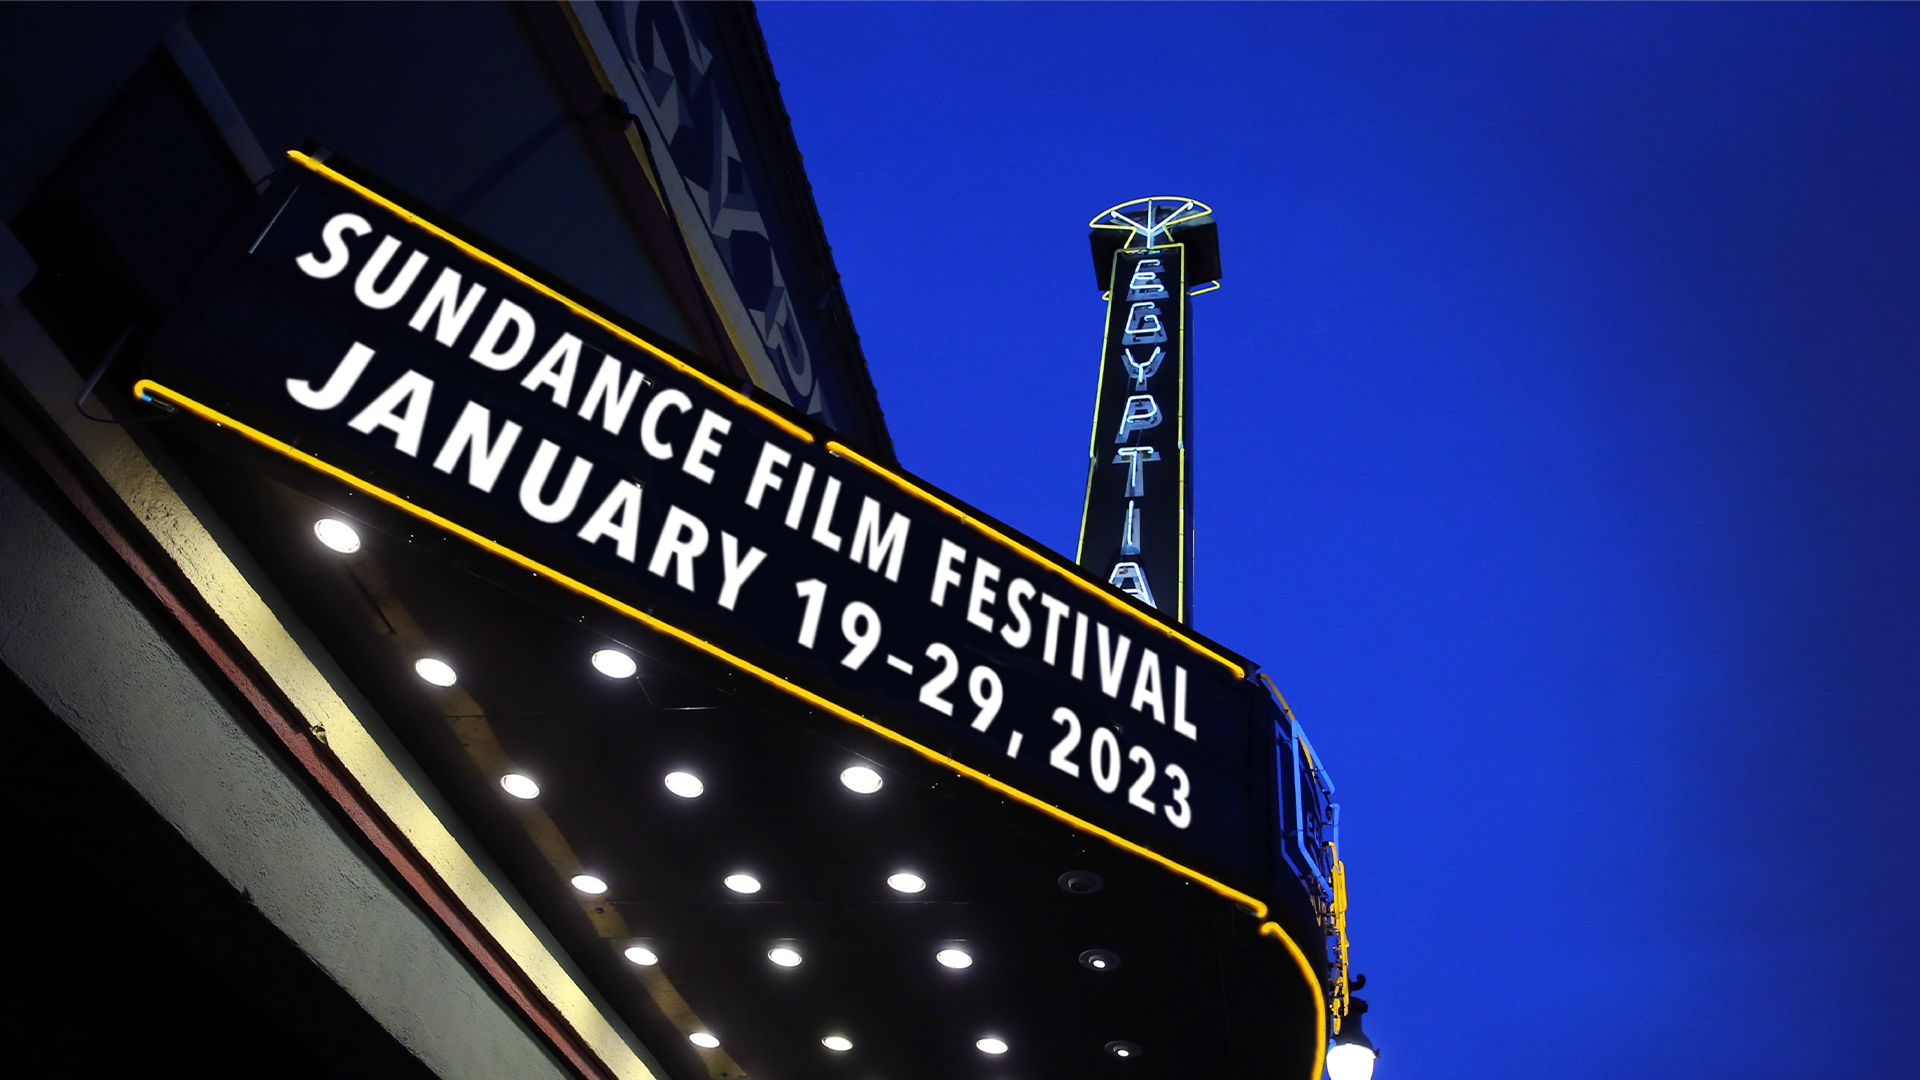 The marquee sign of the 2023 Sundance Film Festival.